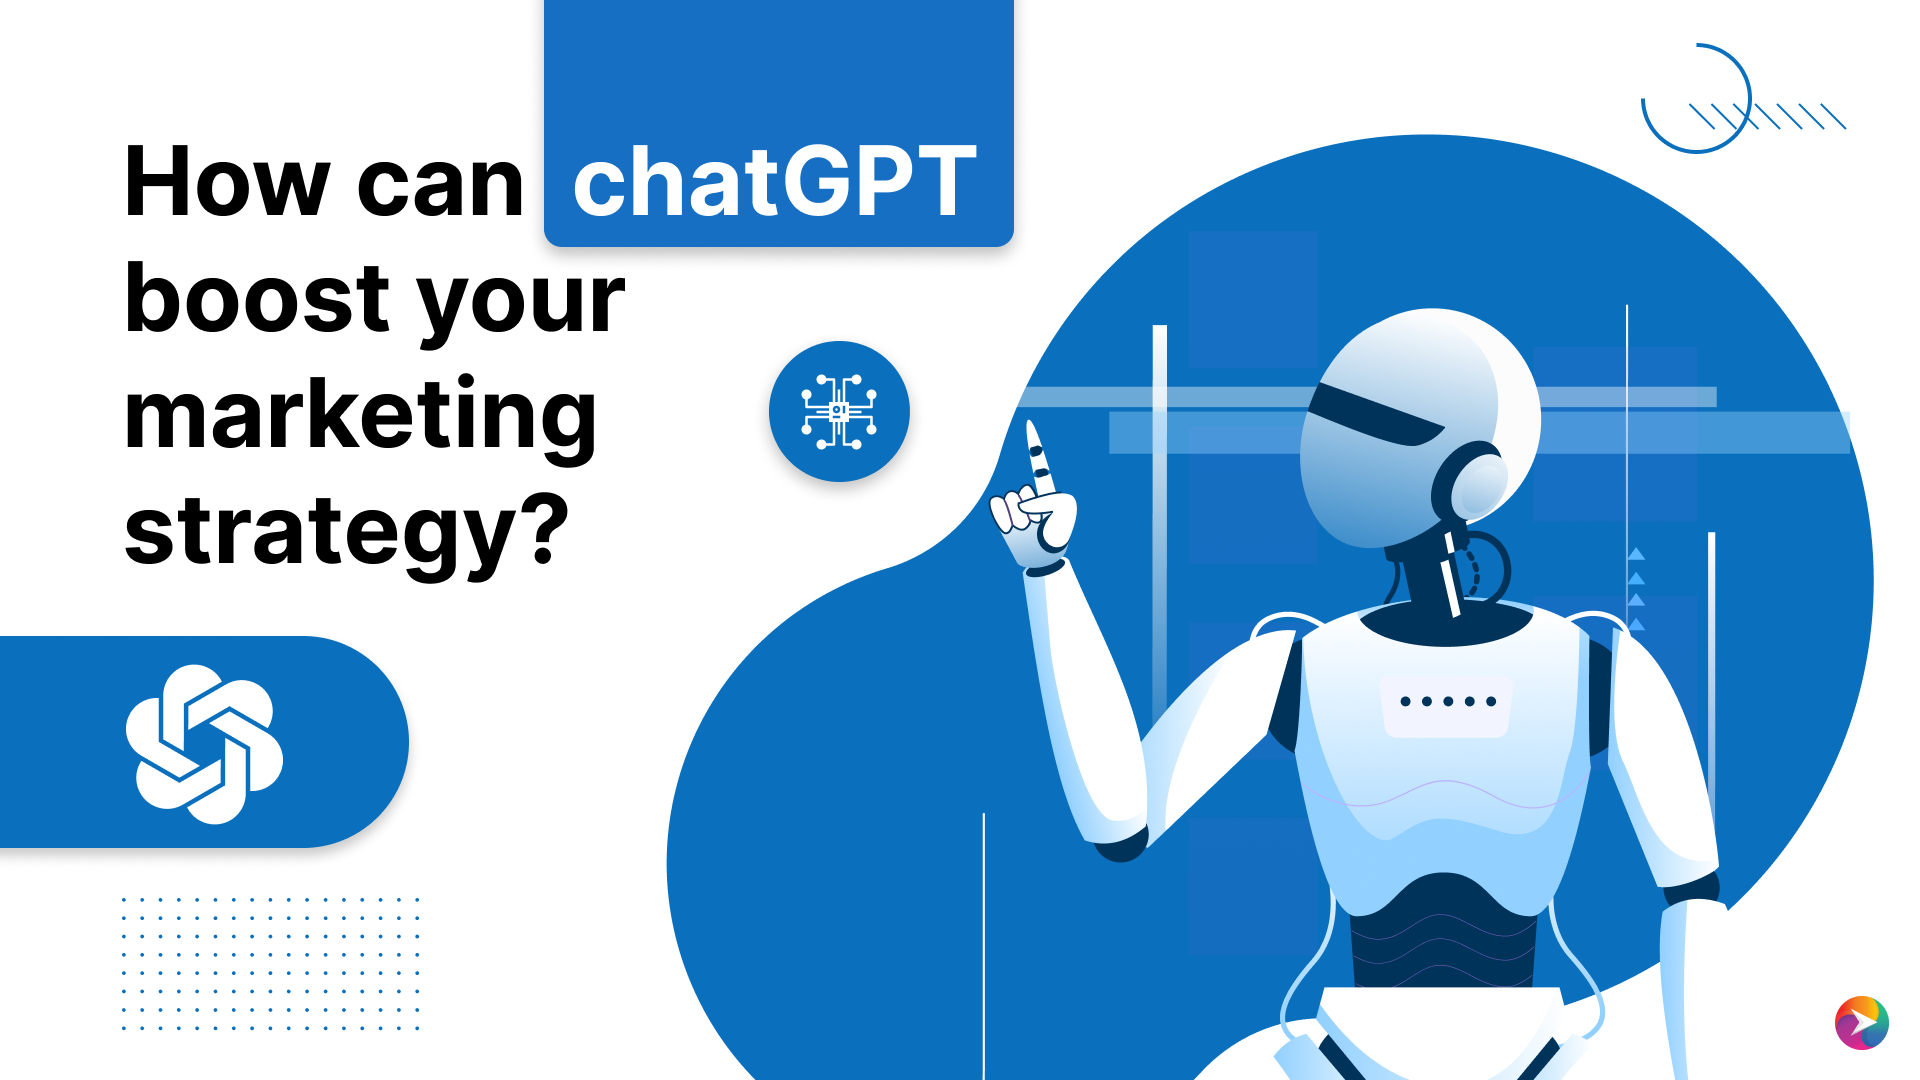 How can chatGPT boost your marketing strategy?